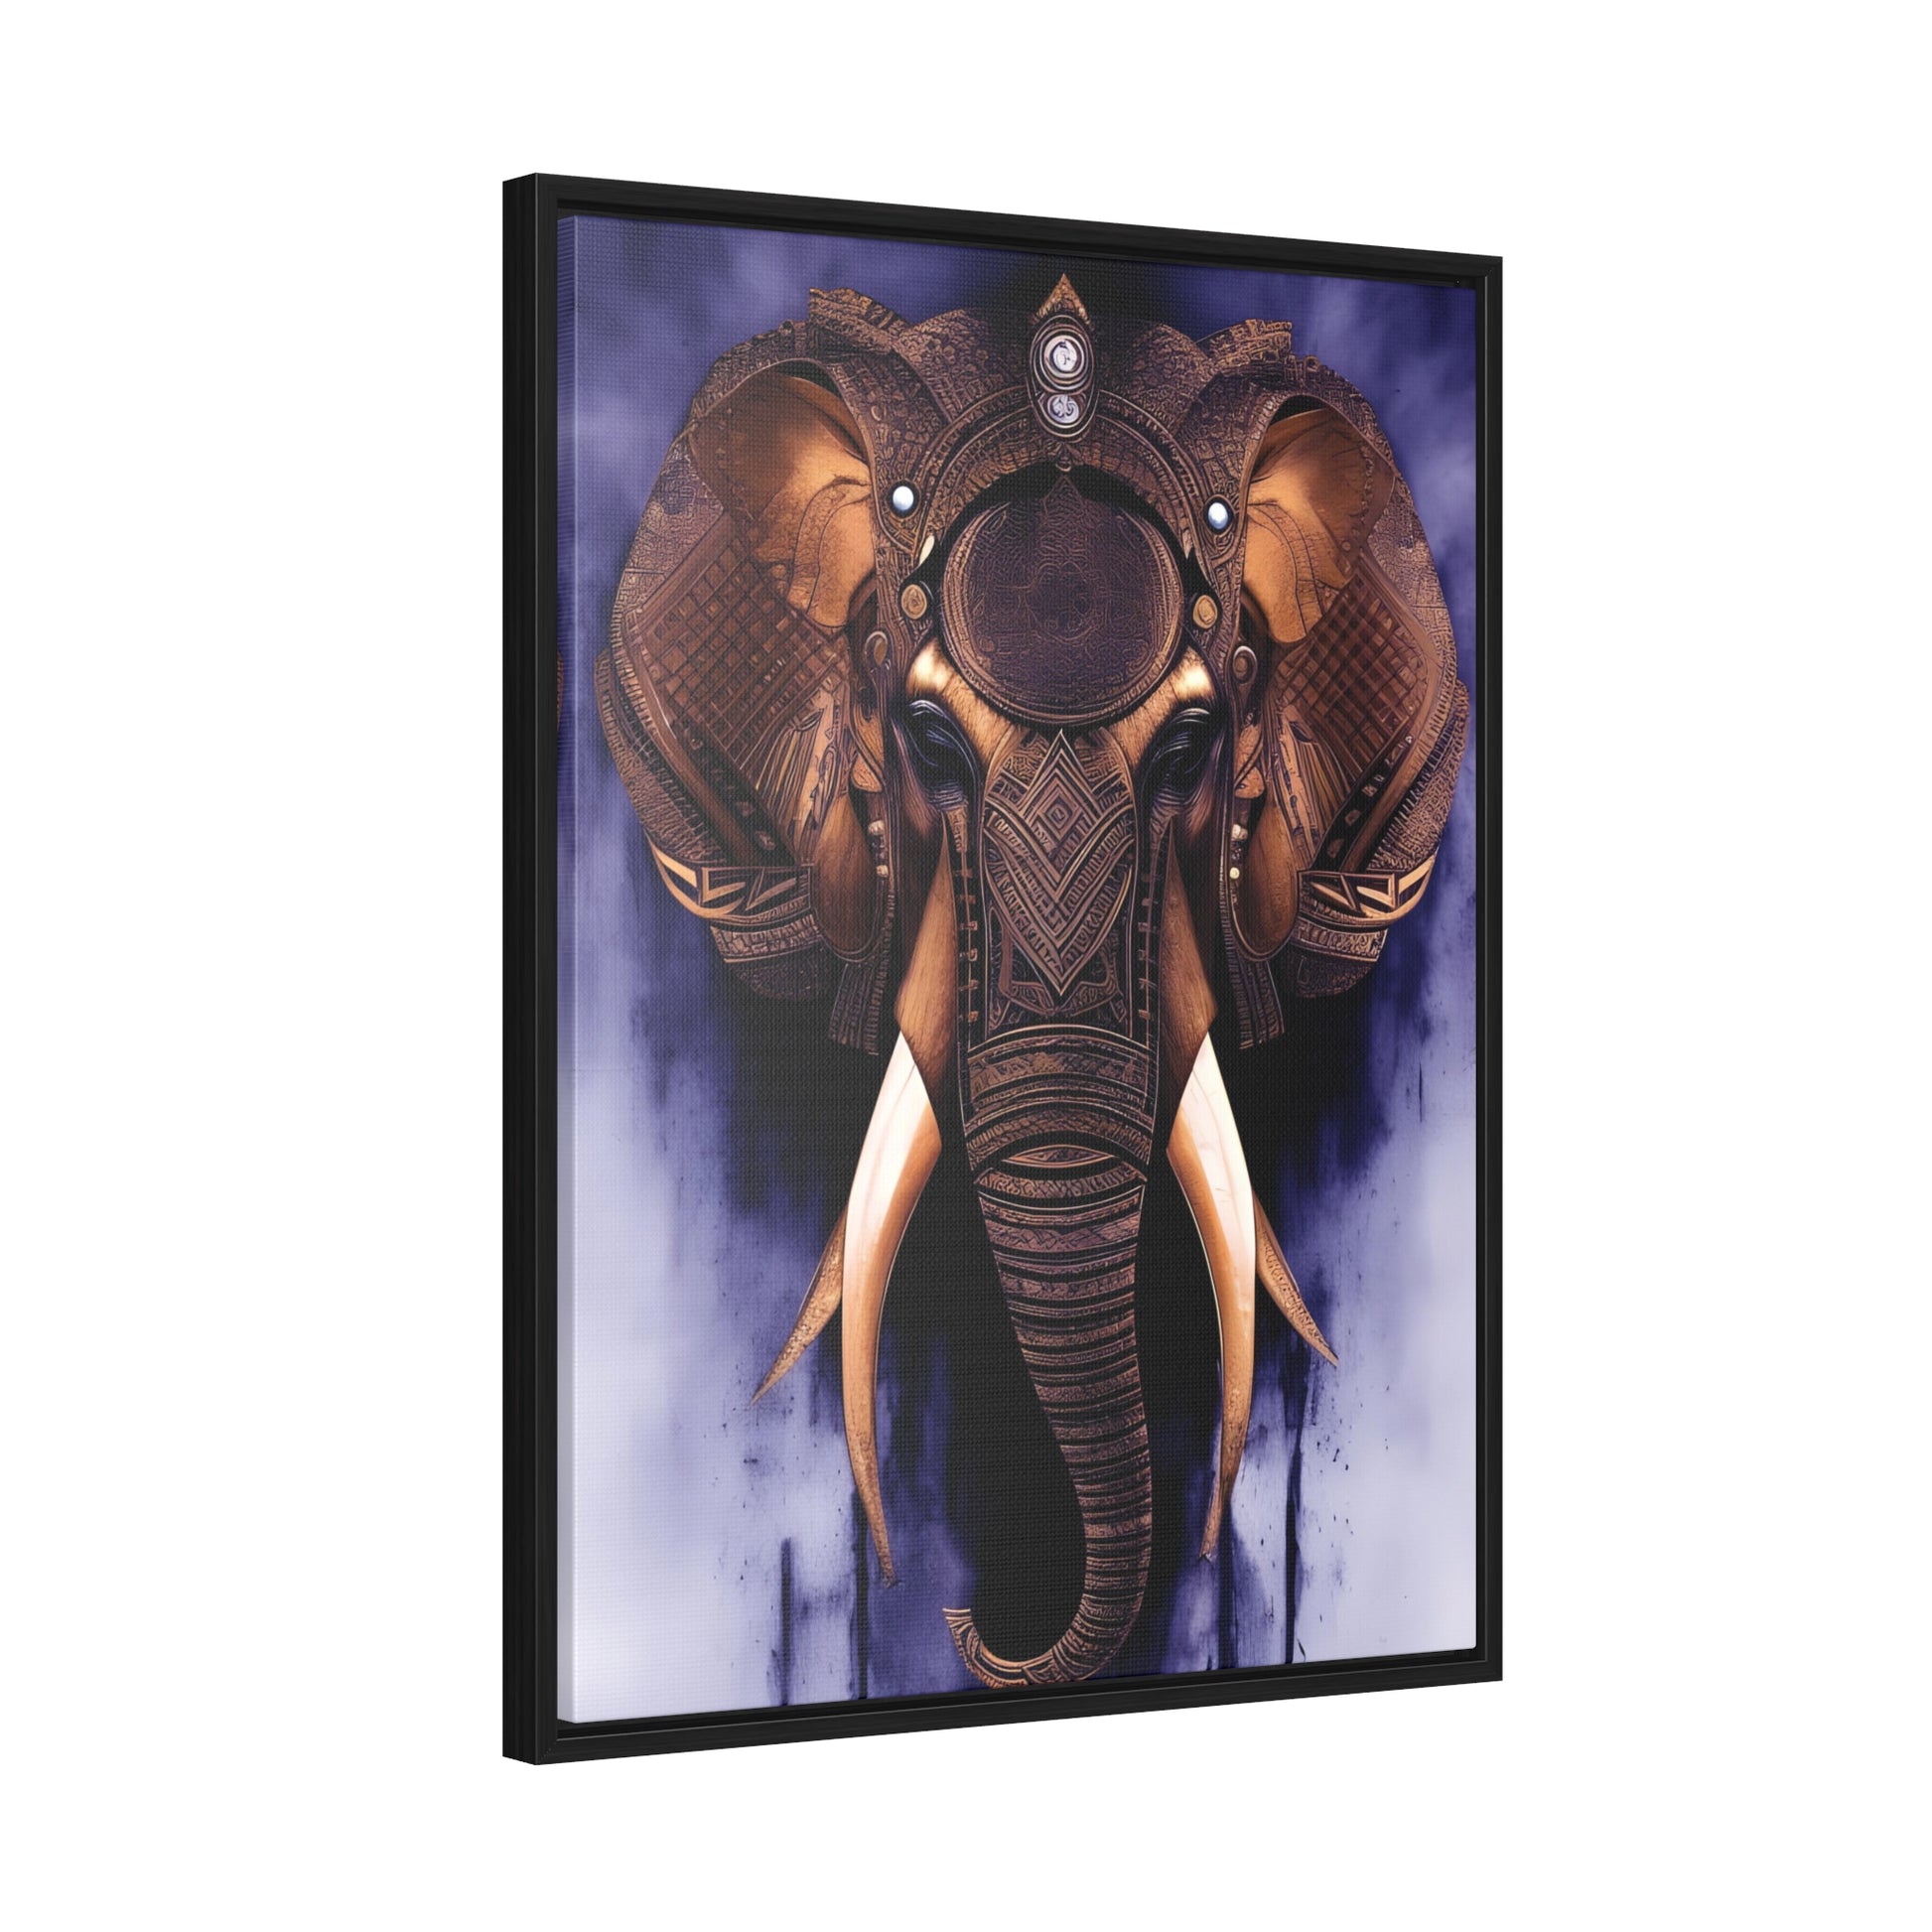 Elephant Themed Modern Wall Art - Tribal Elephant Head on Purple Background Print on Canvas in a Floating Frame side view